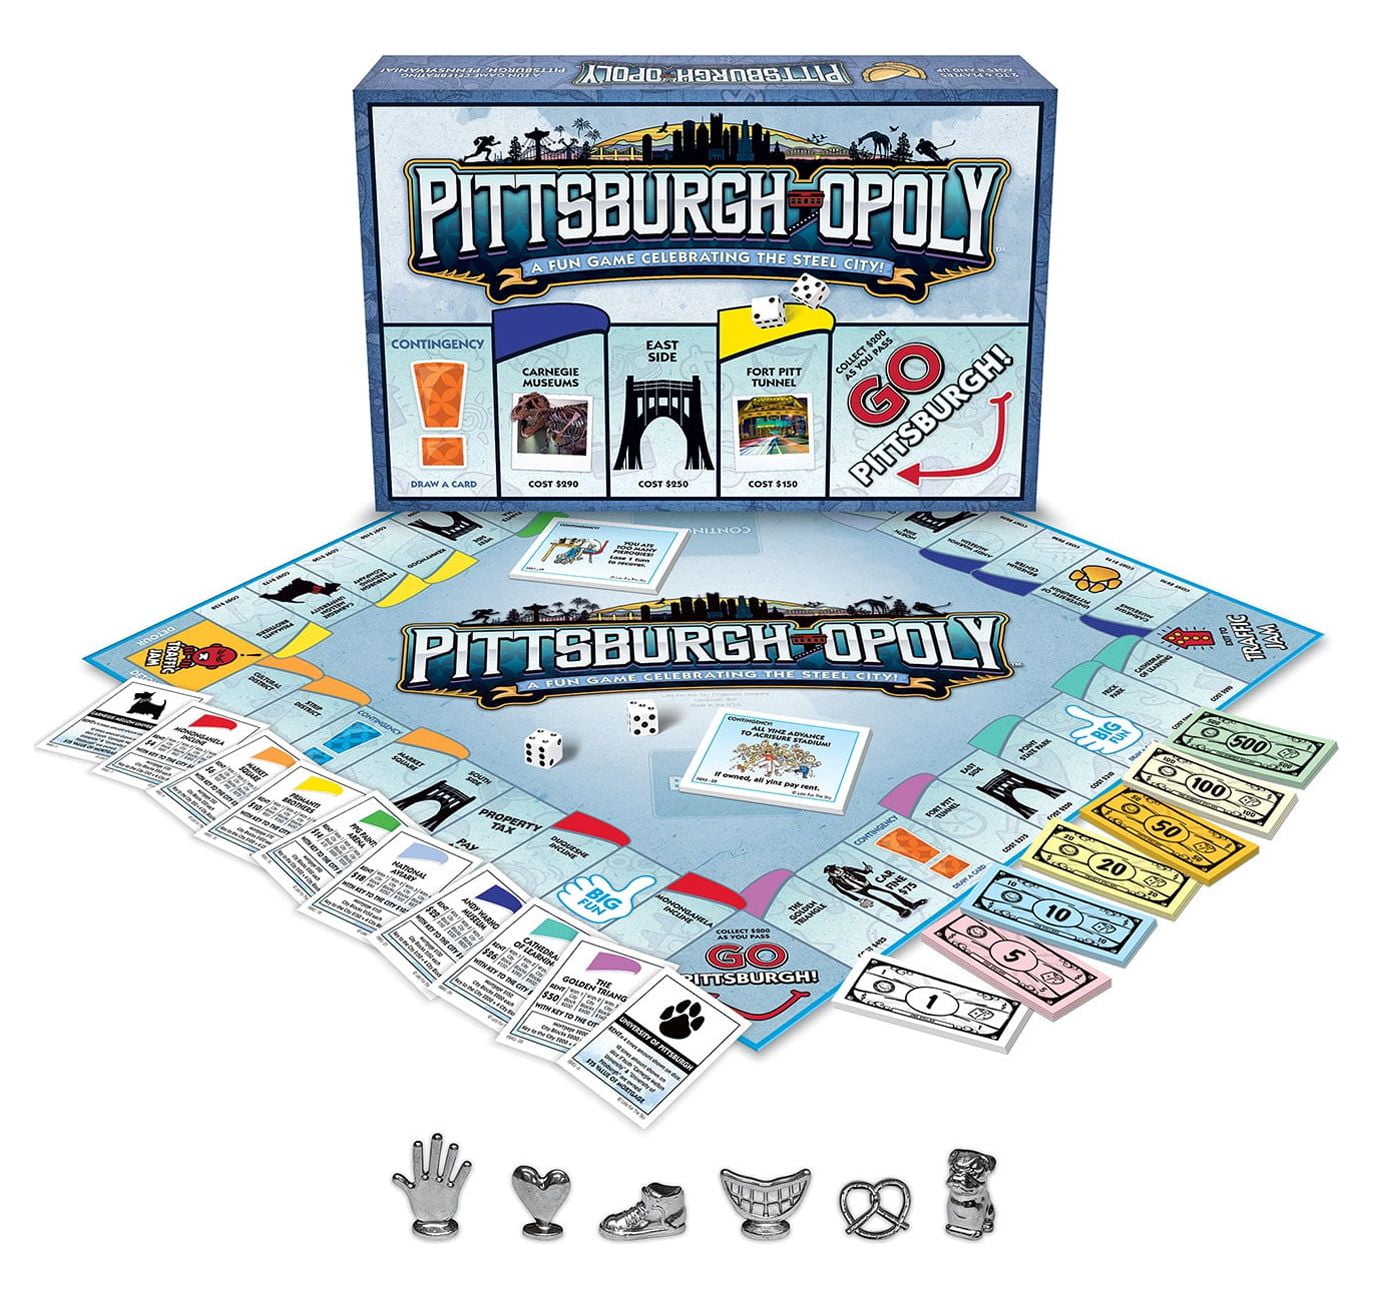 Pittsburgh-Opoly Monopoly Game